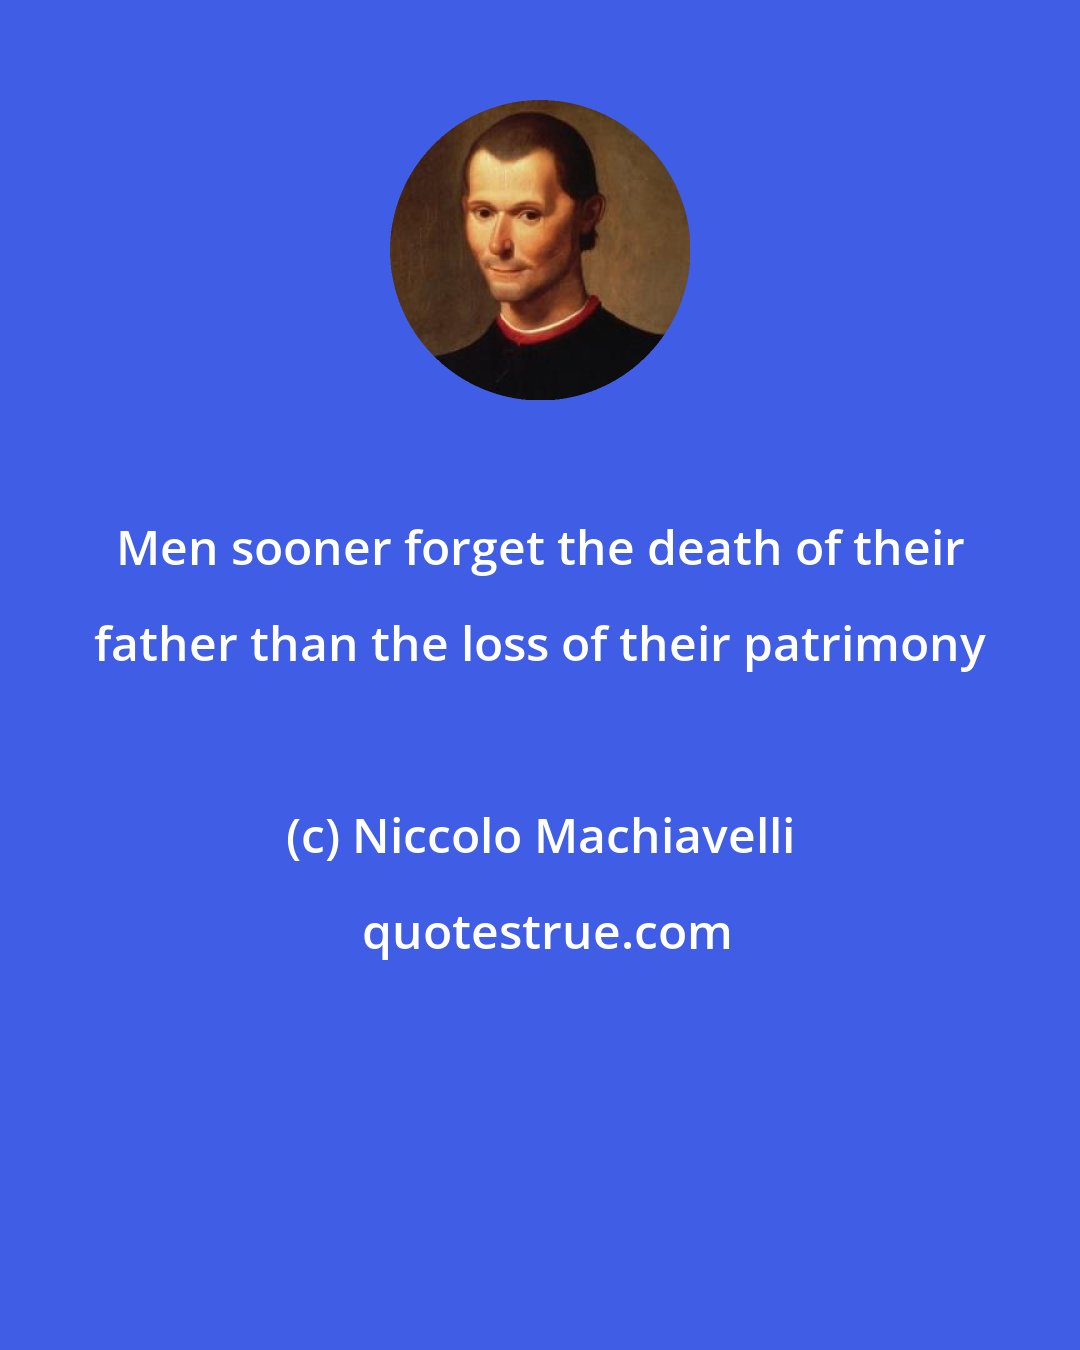 Niccolo Machiavelli: Men sooner forget the death of their father than the loss of their patrimony